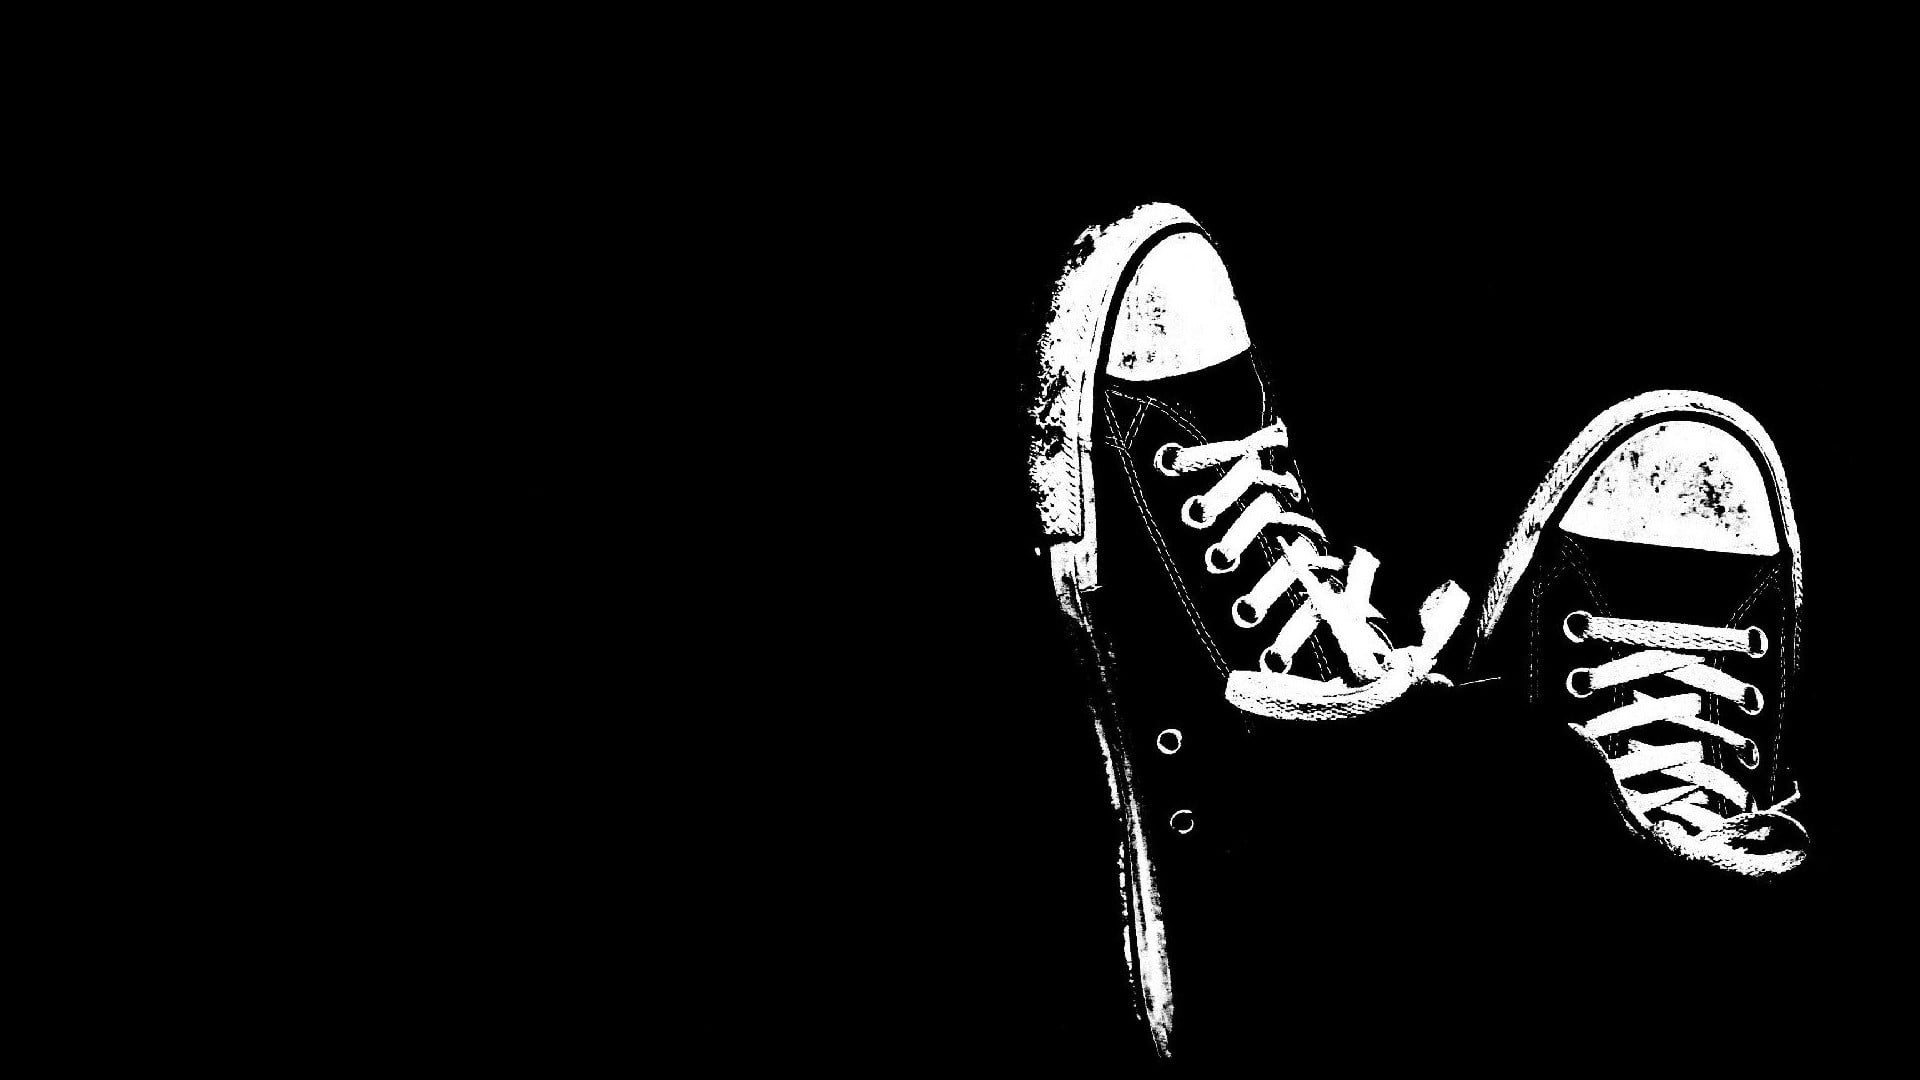 black-and-white sneakers artwork, All Star, shoes, copy space